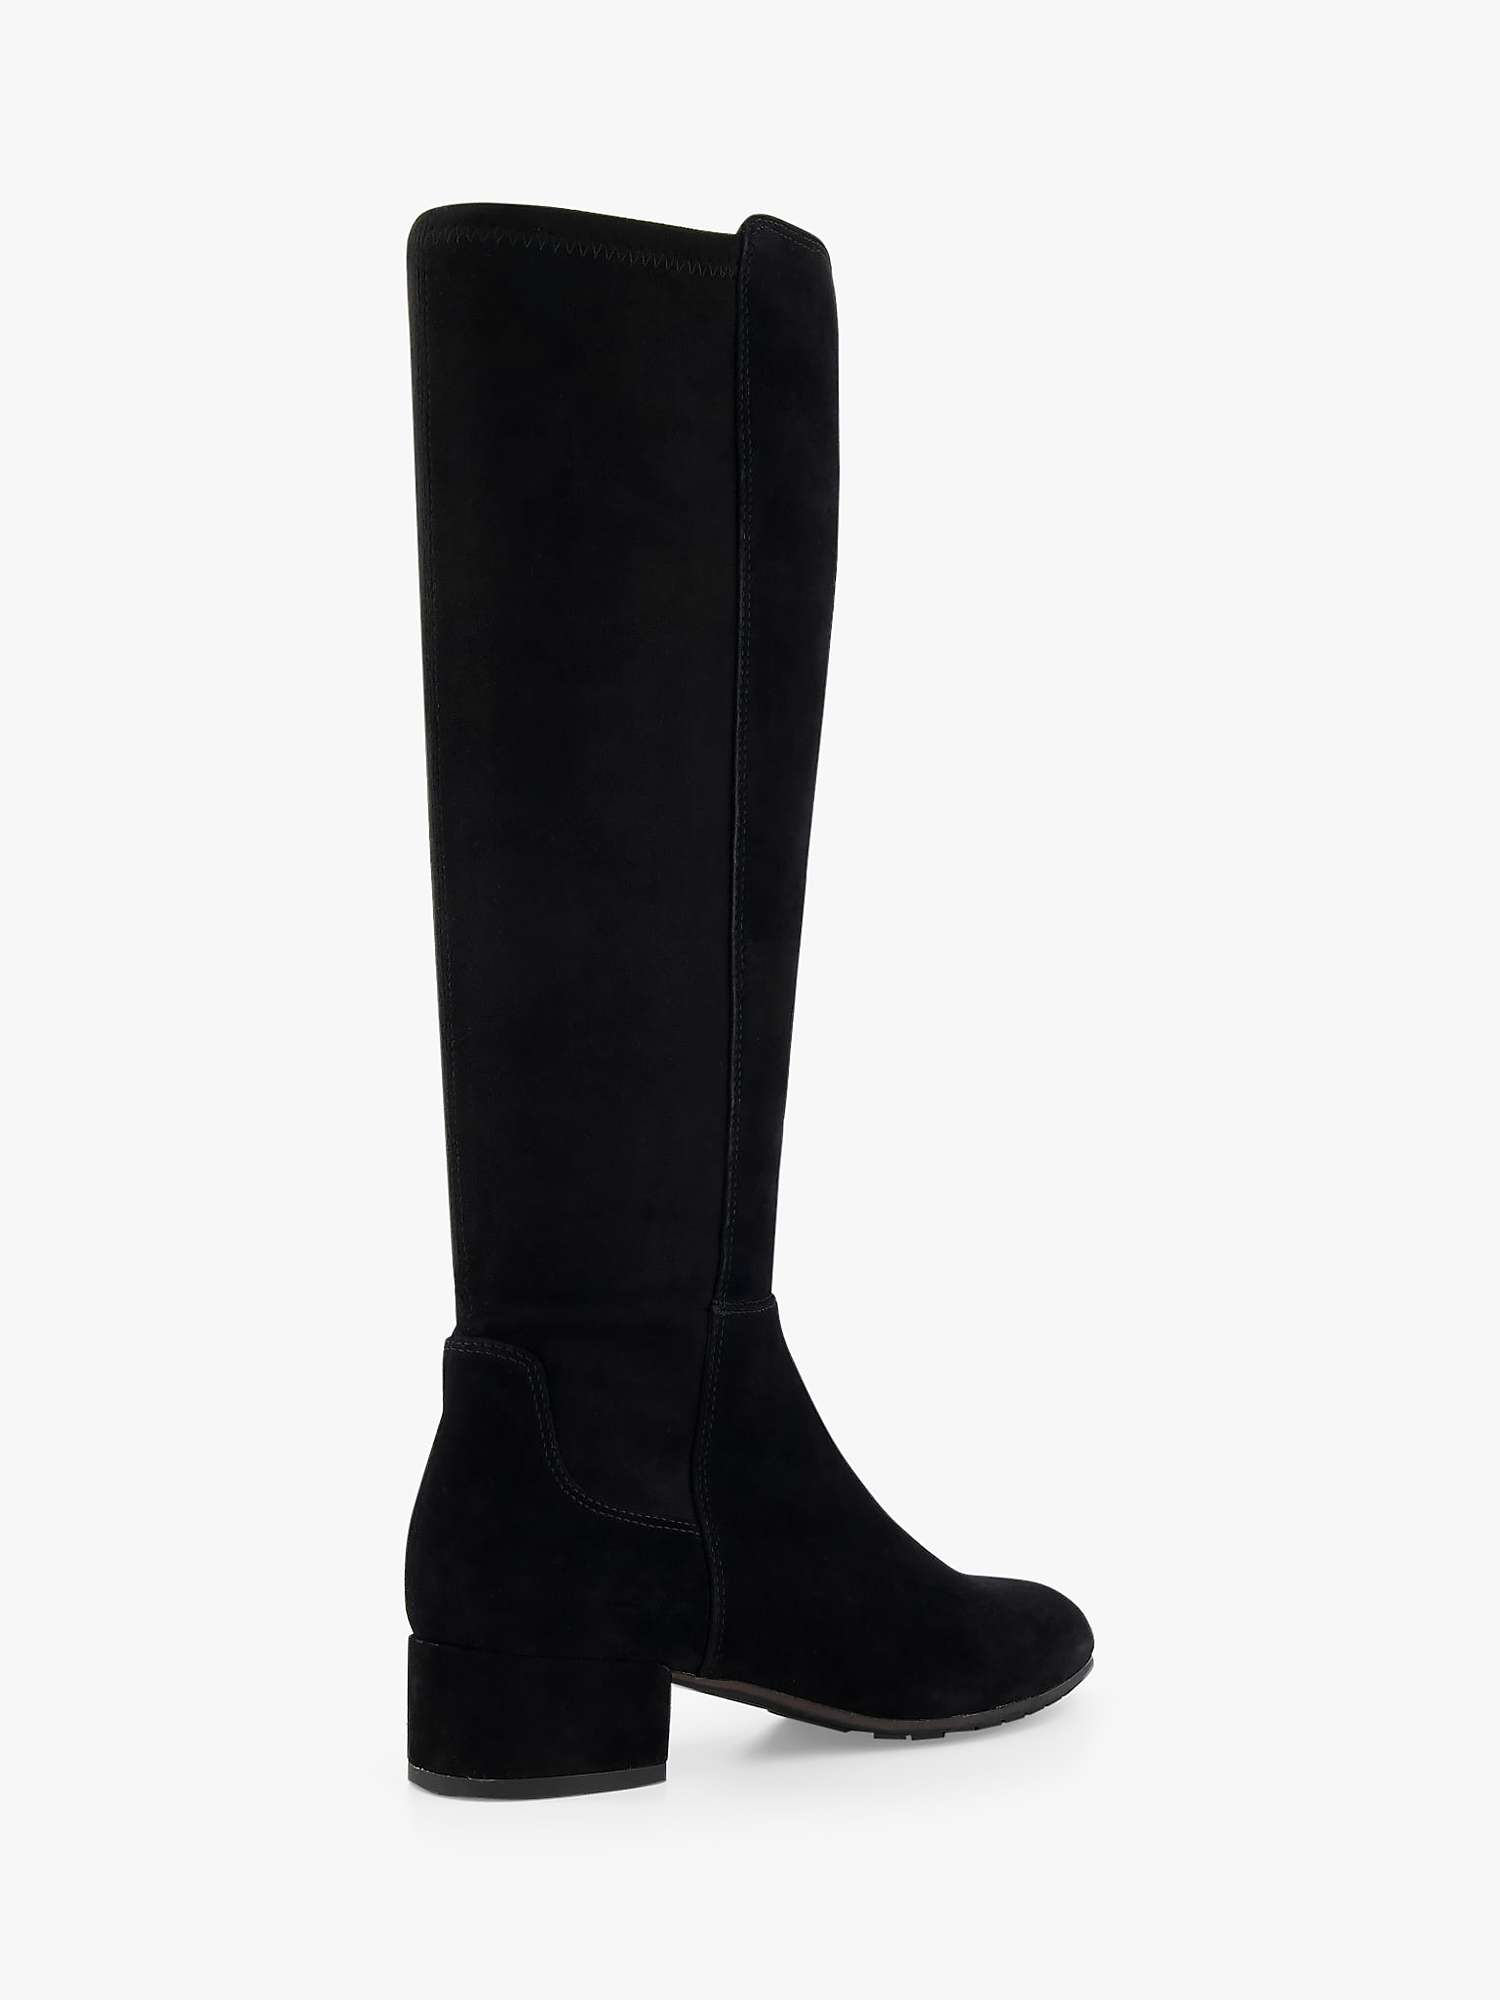 Buy Dune Tayla Suede Knee High Boots Online at johnlewis.com